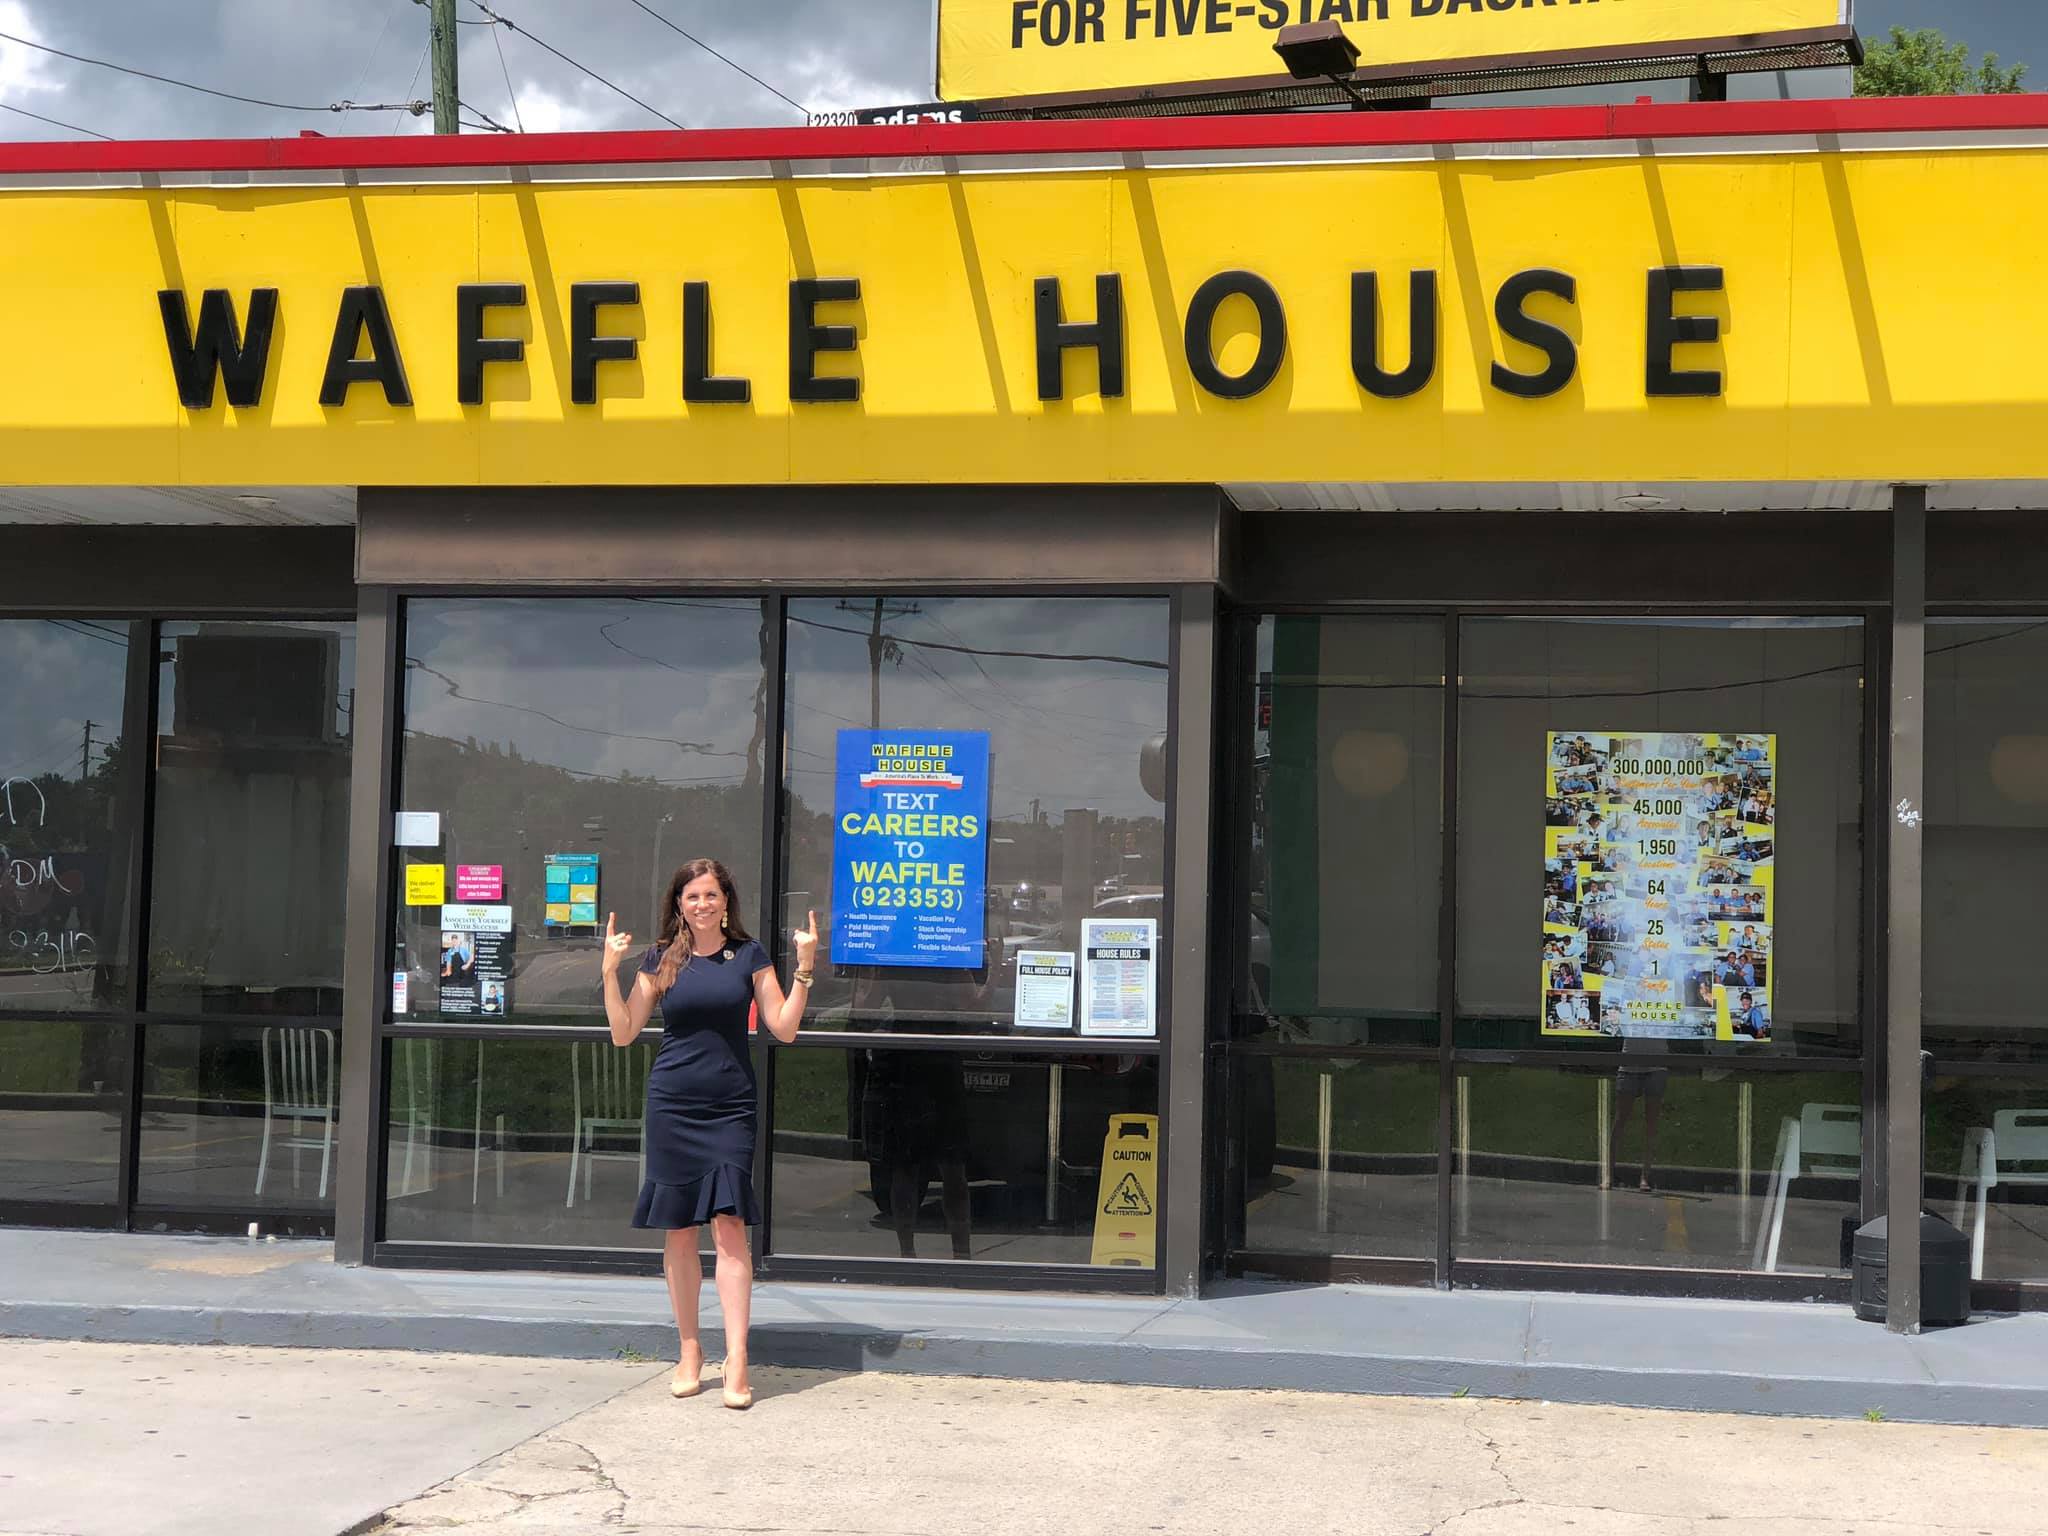 From Waffle House to US House